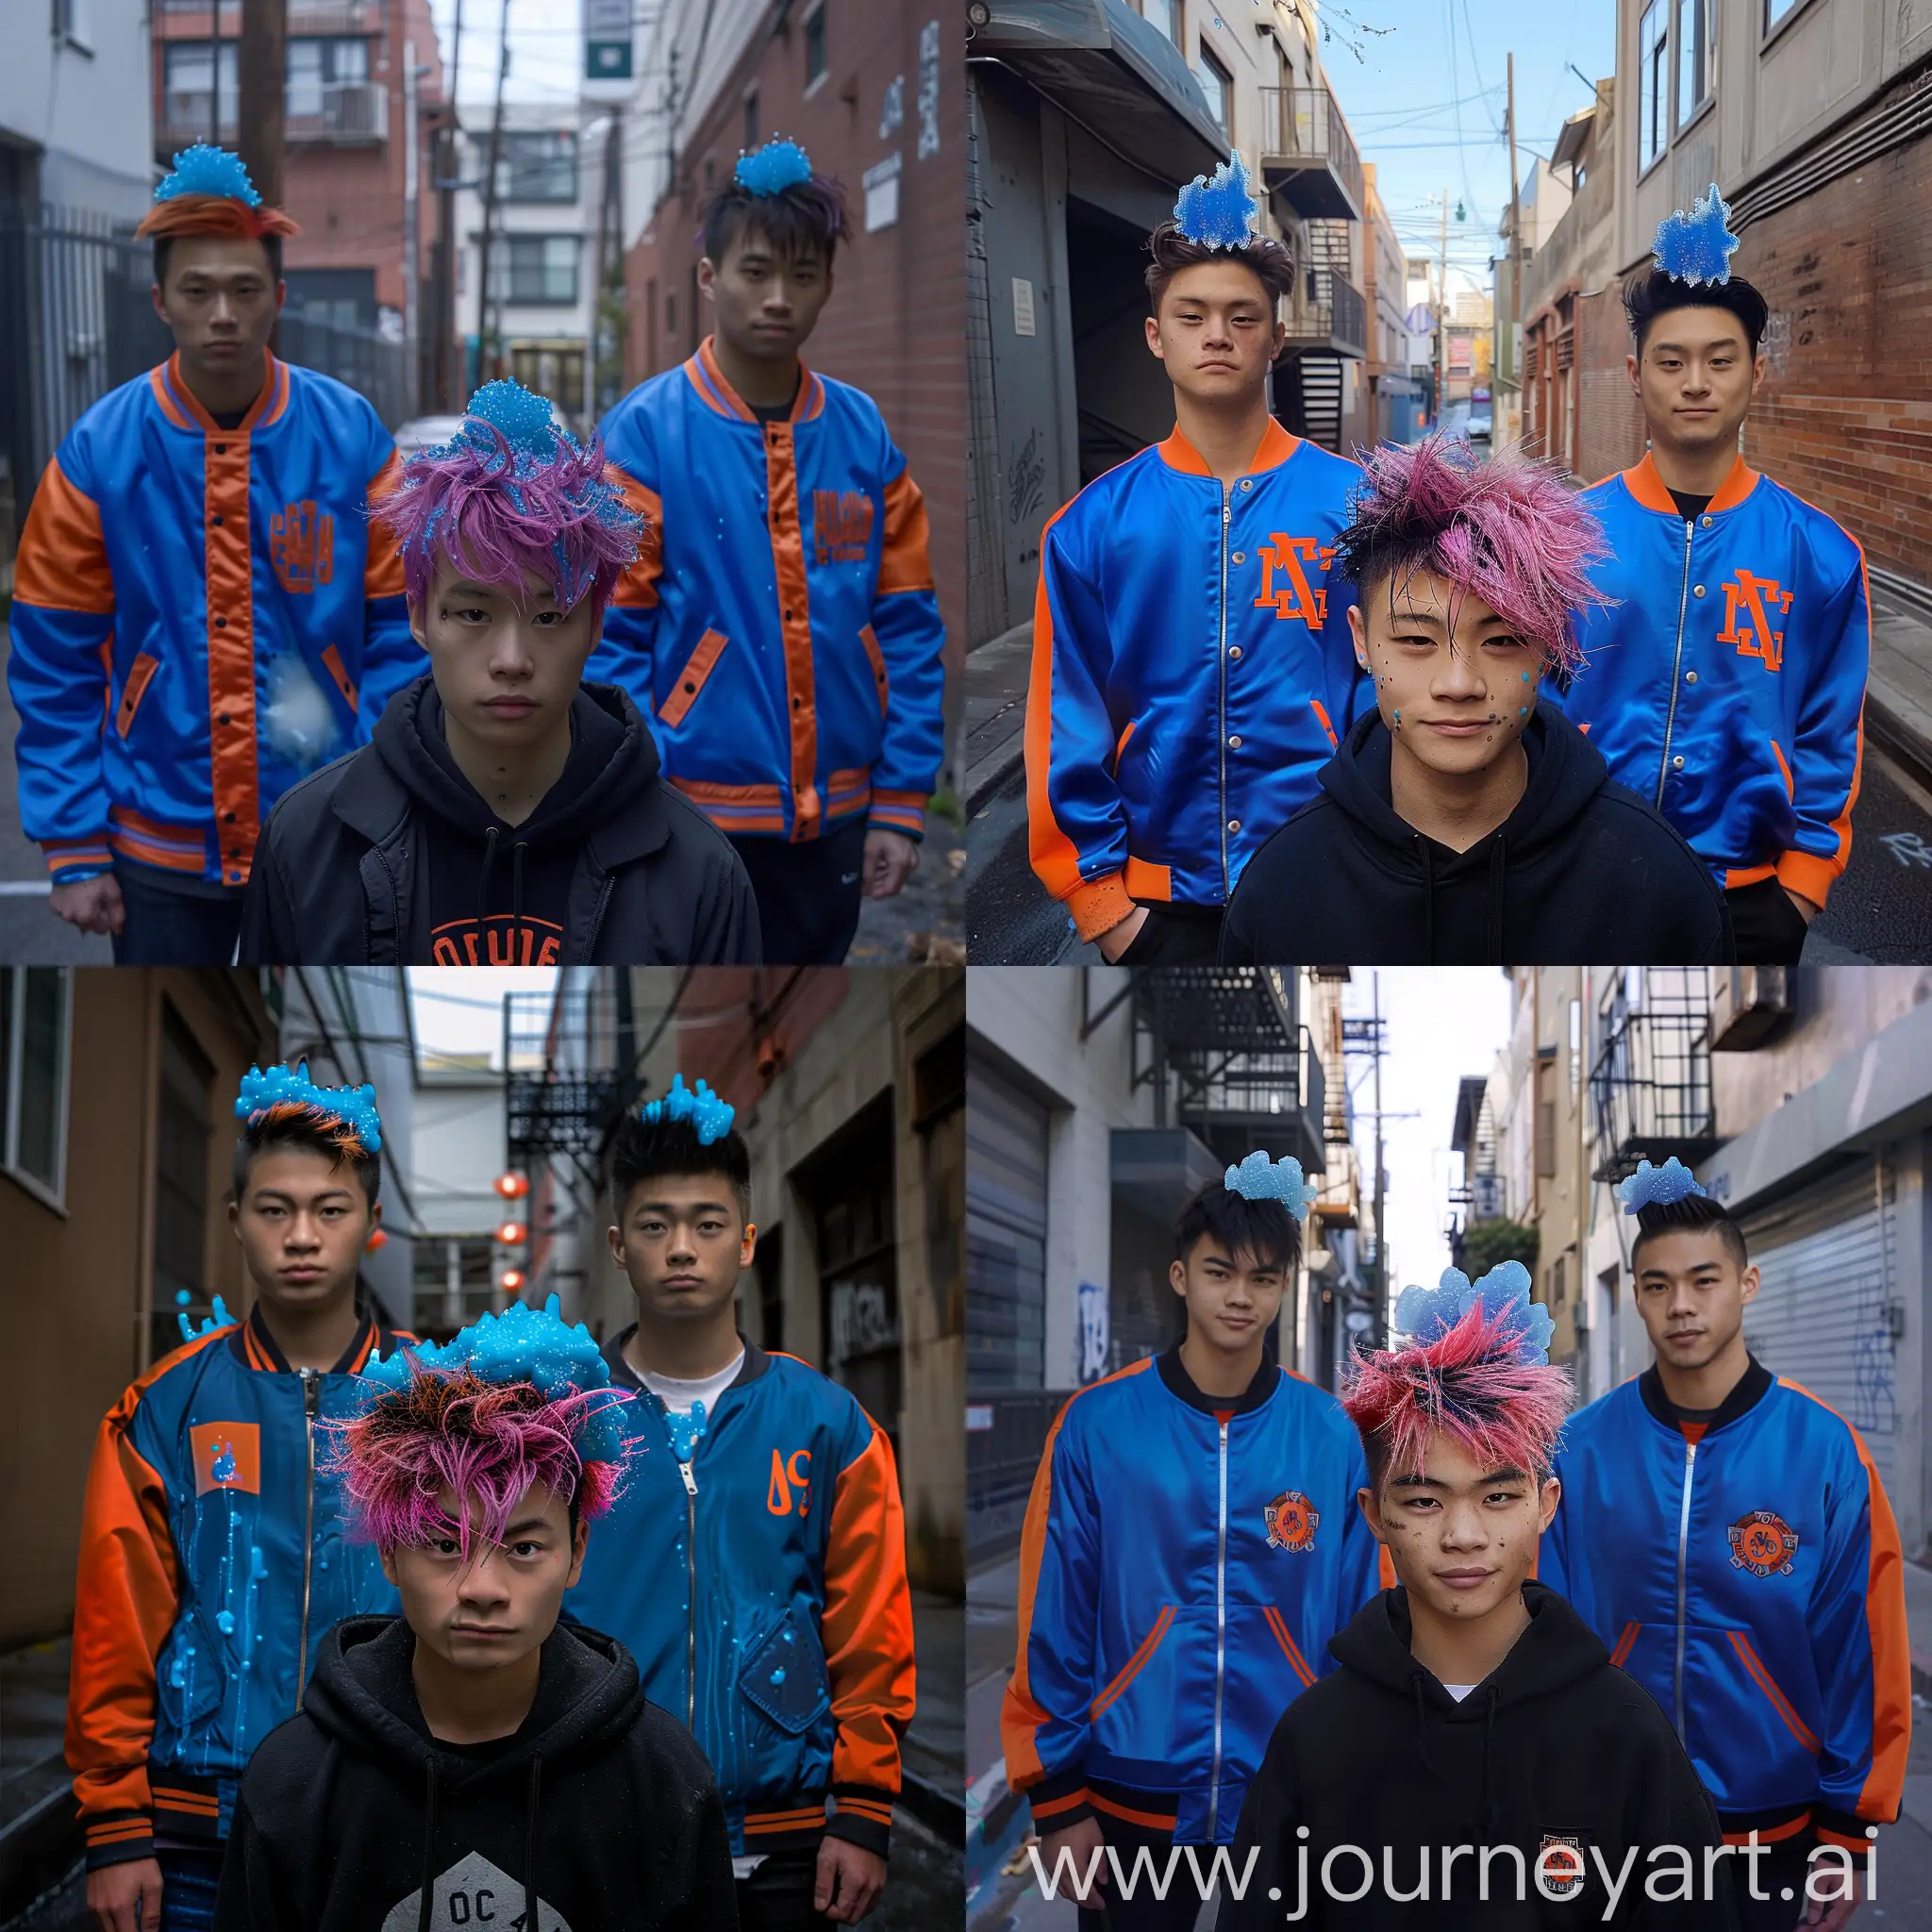 Urban-Encounter-Young-Boy-with-Pink-Hair-and-Jocks-in-Alley